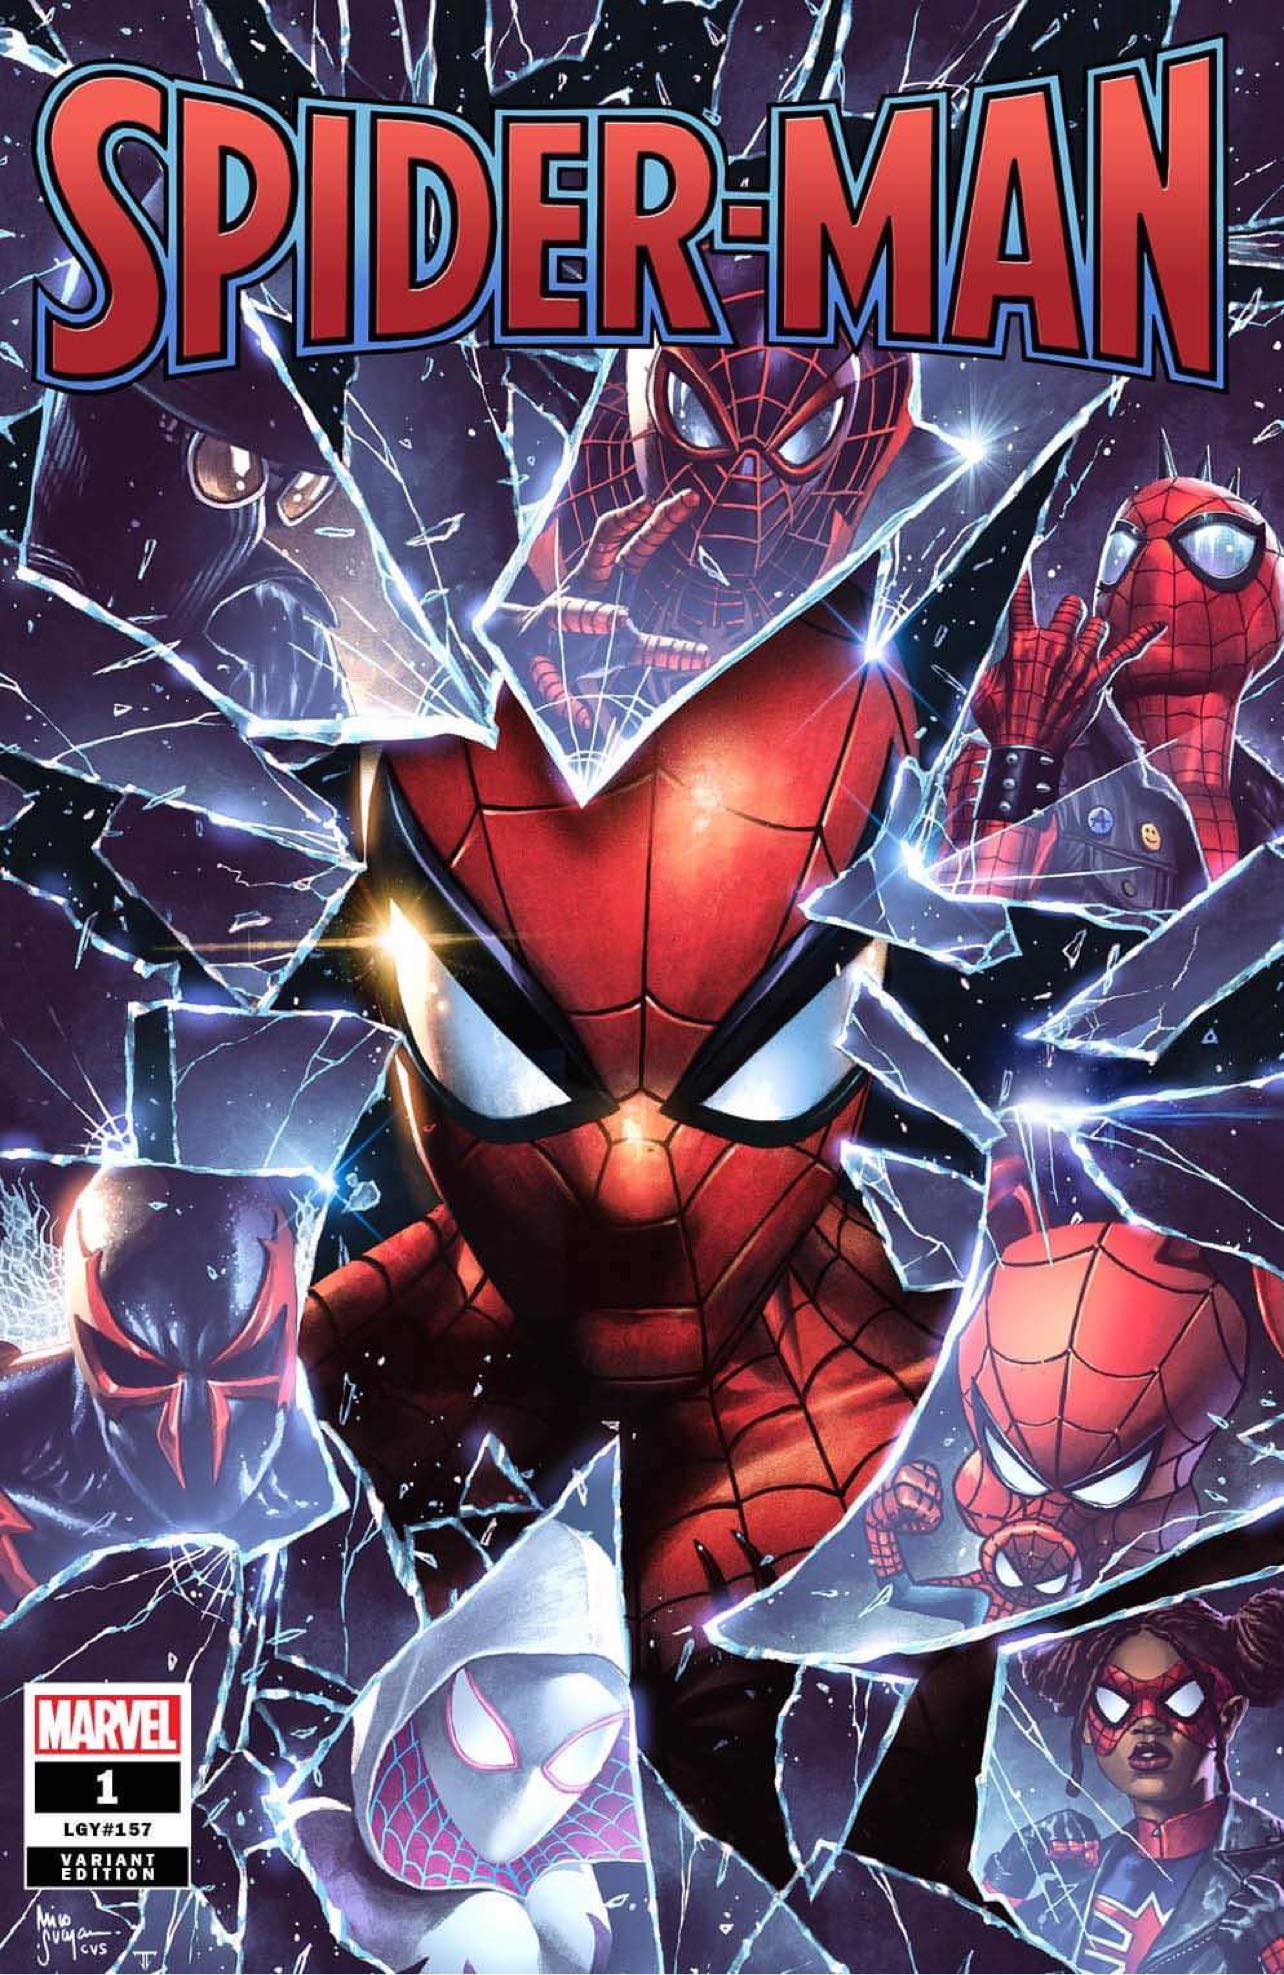 10/05/2022 SPIDER-MAN #1 MICO SUAYAN EXCLUSIVE VARIANT OPTIONS